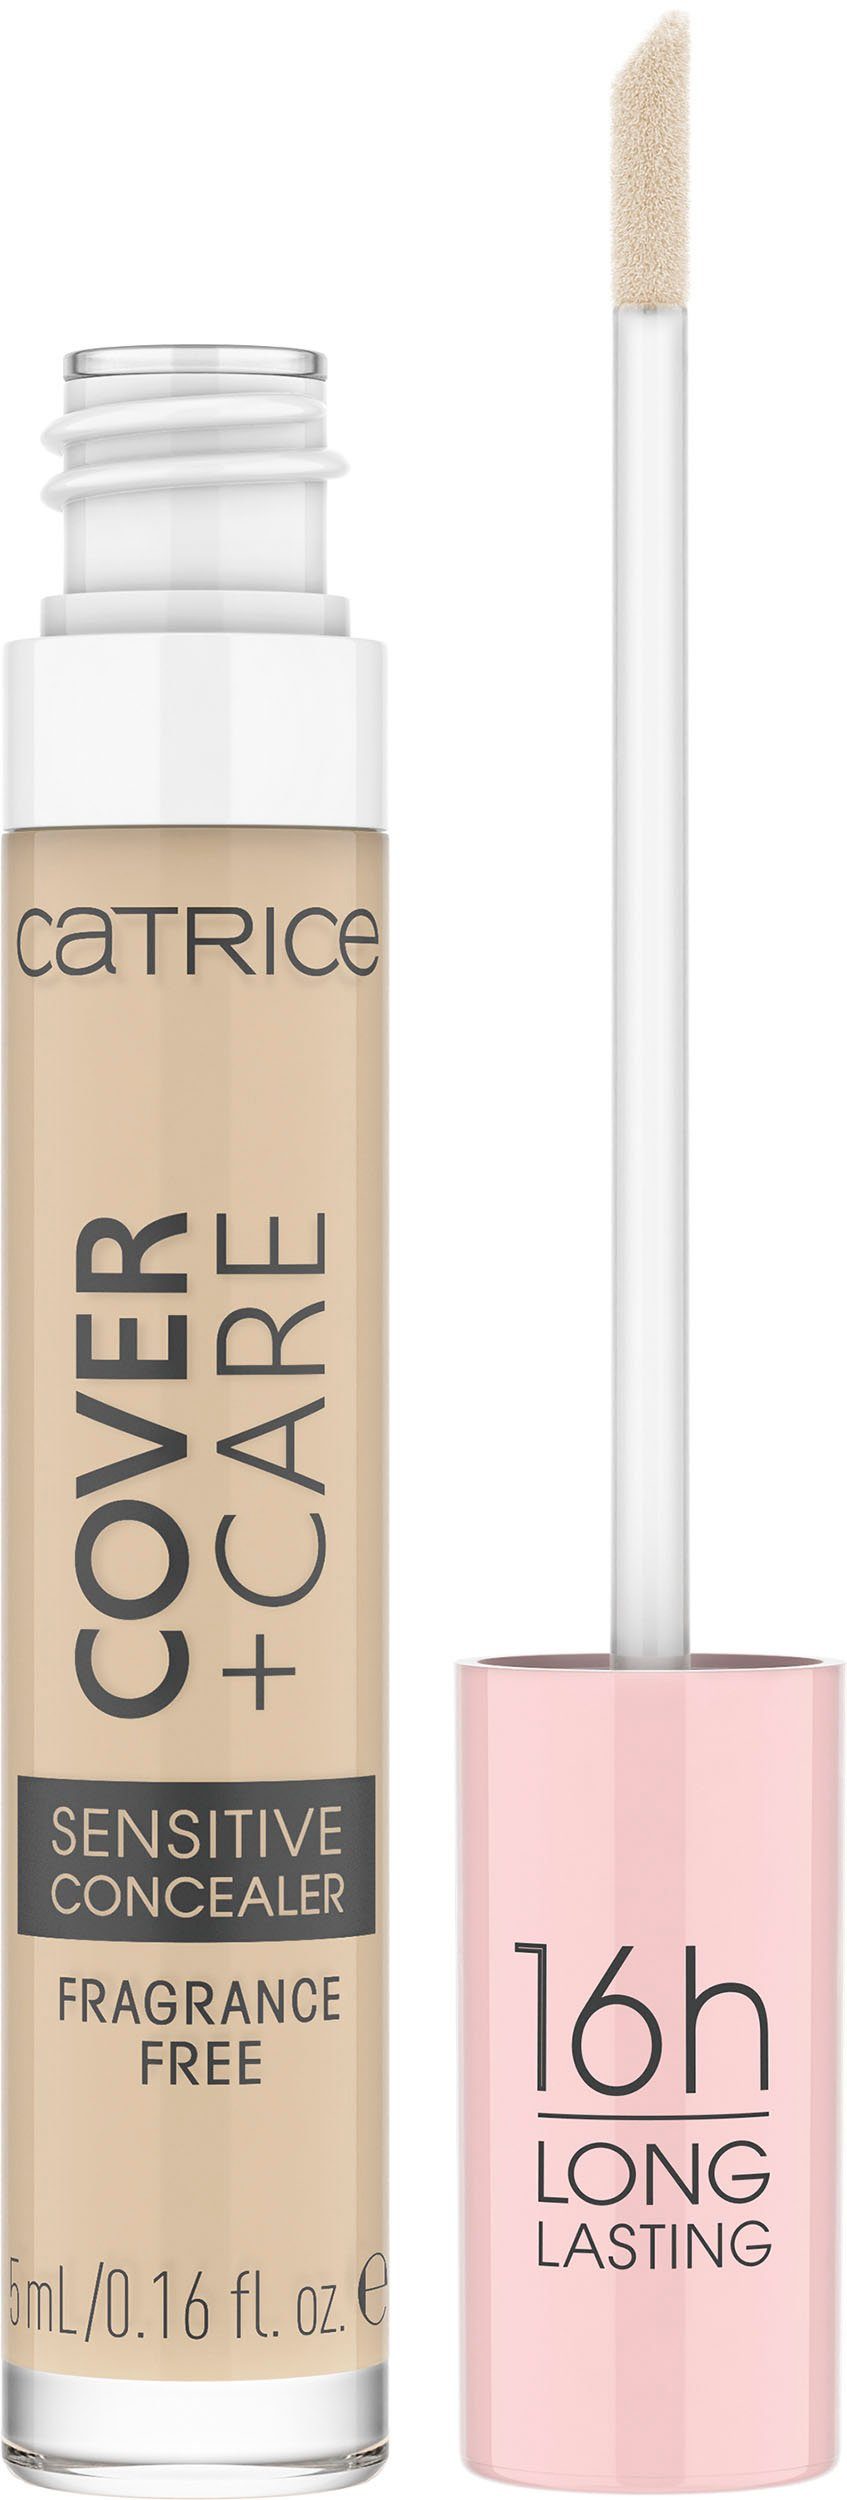 Concealer Catrice Care Sensitive Concealer, 3-tlg. 010C Cover + Catrice nude